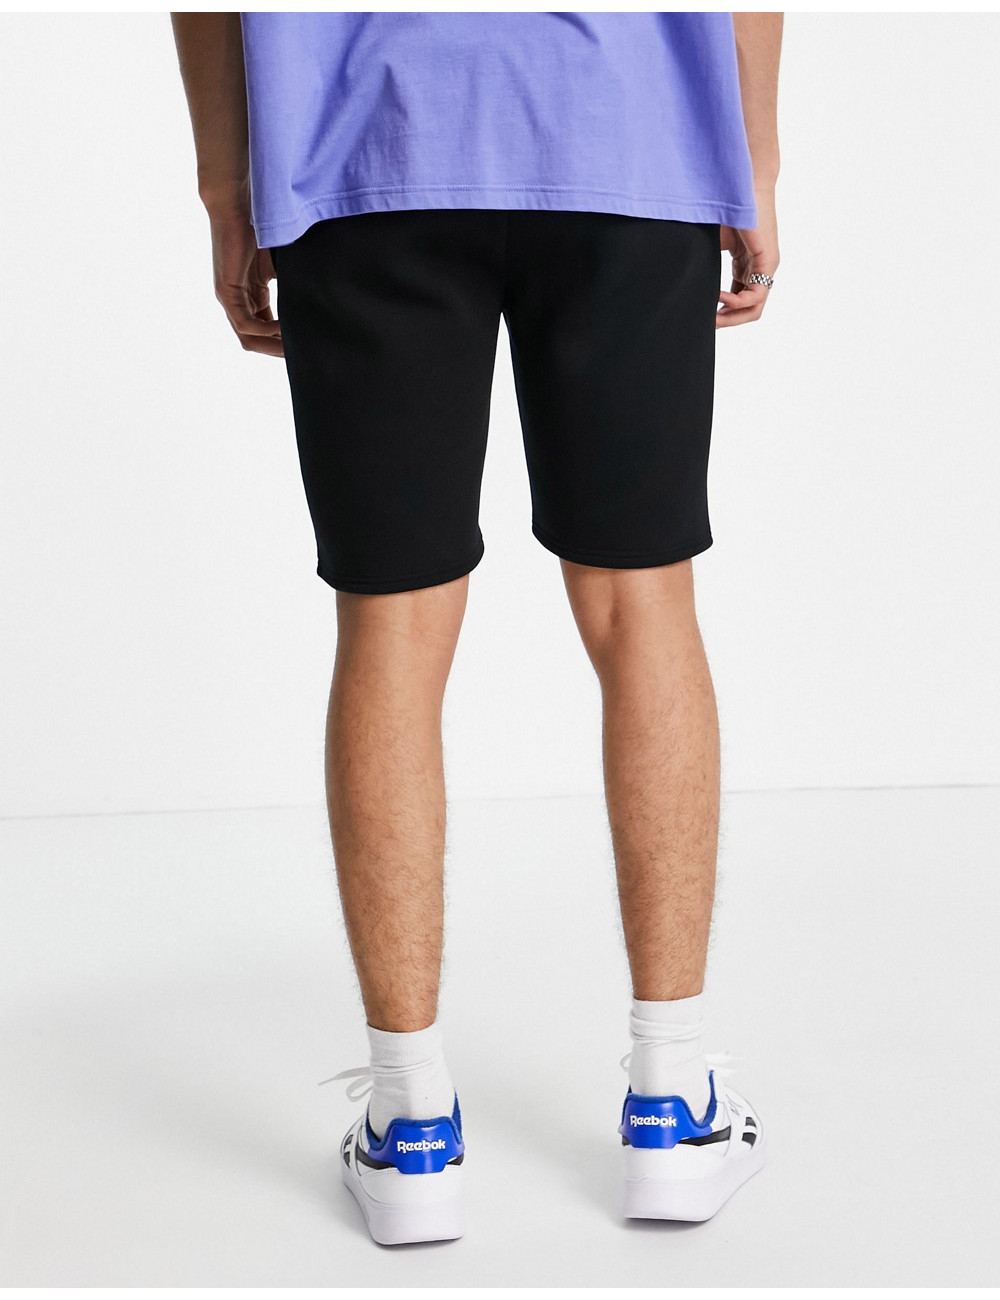 Topman co-ord discovery...